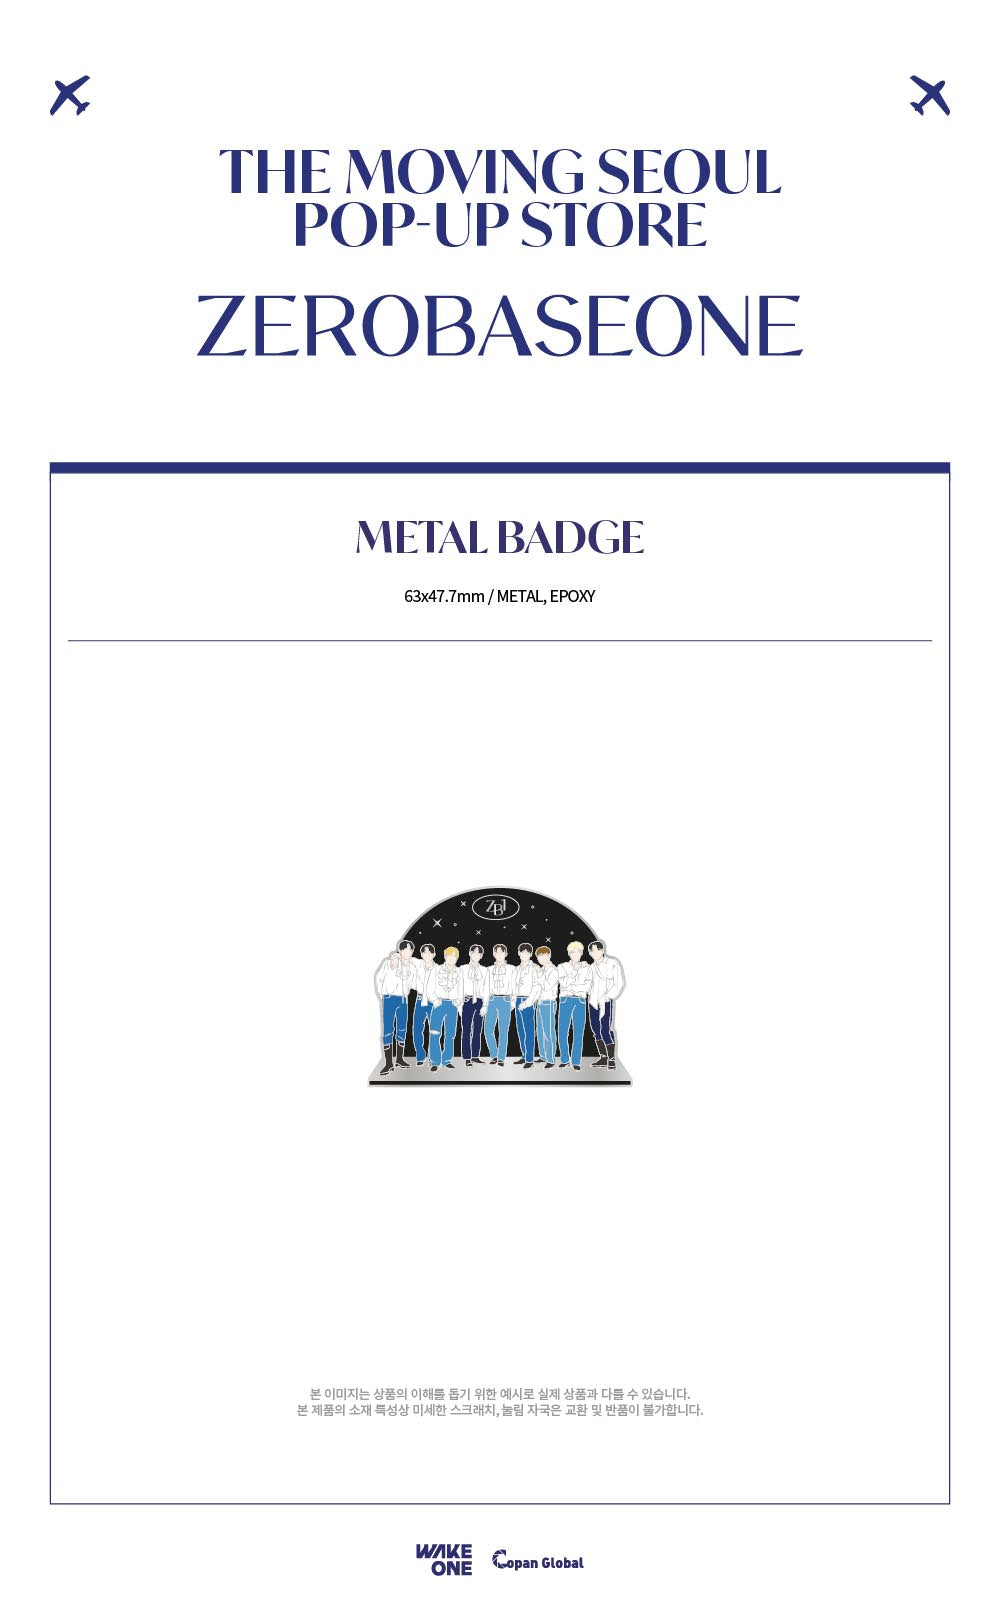 ZEROBASEONE The Moving Seoul POP-UP Metal Badge